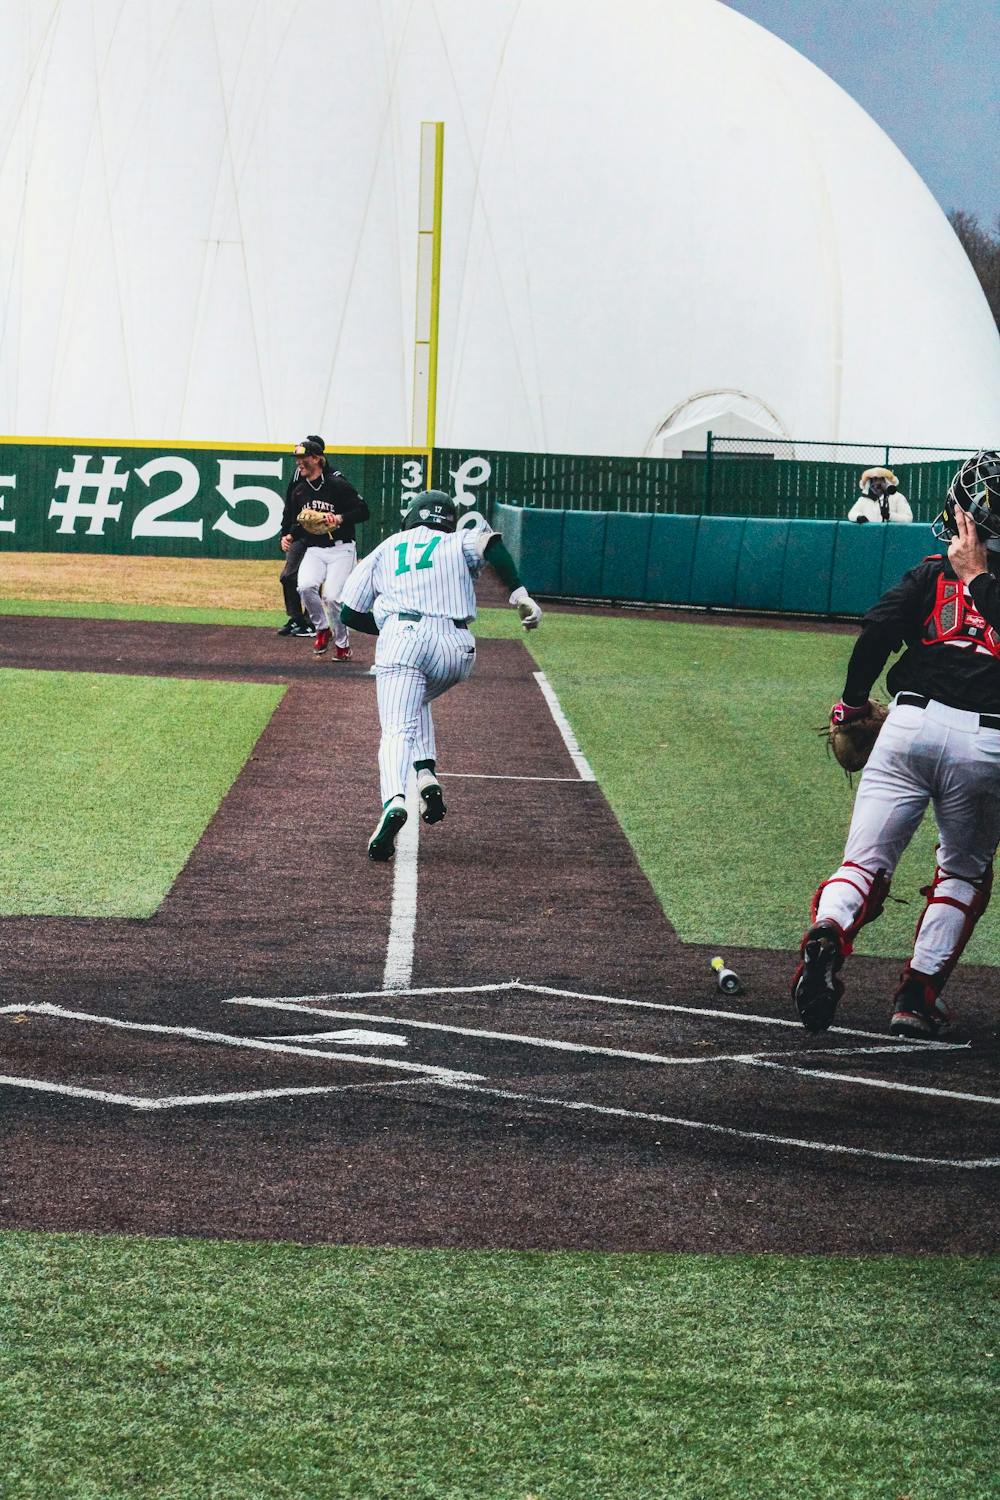 EMU baseball player, #17, in a white and green striped uniform running to first base.